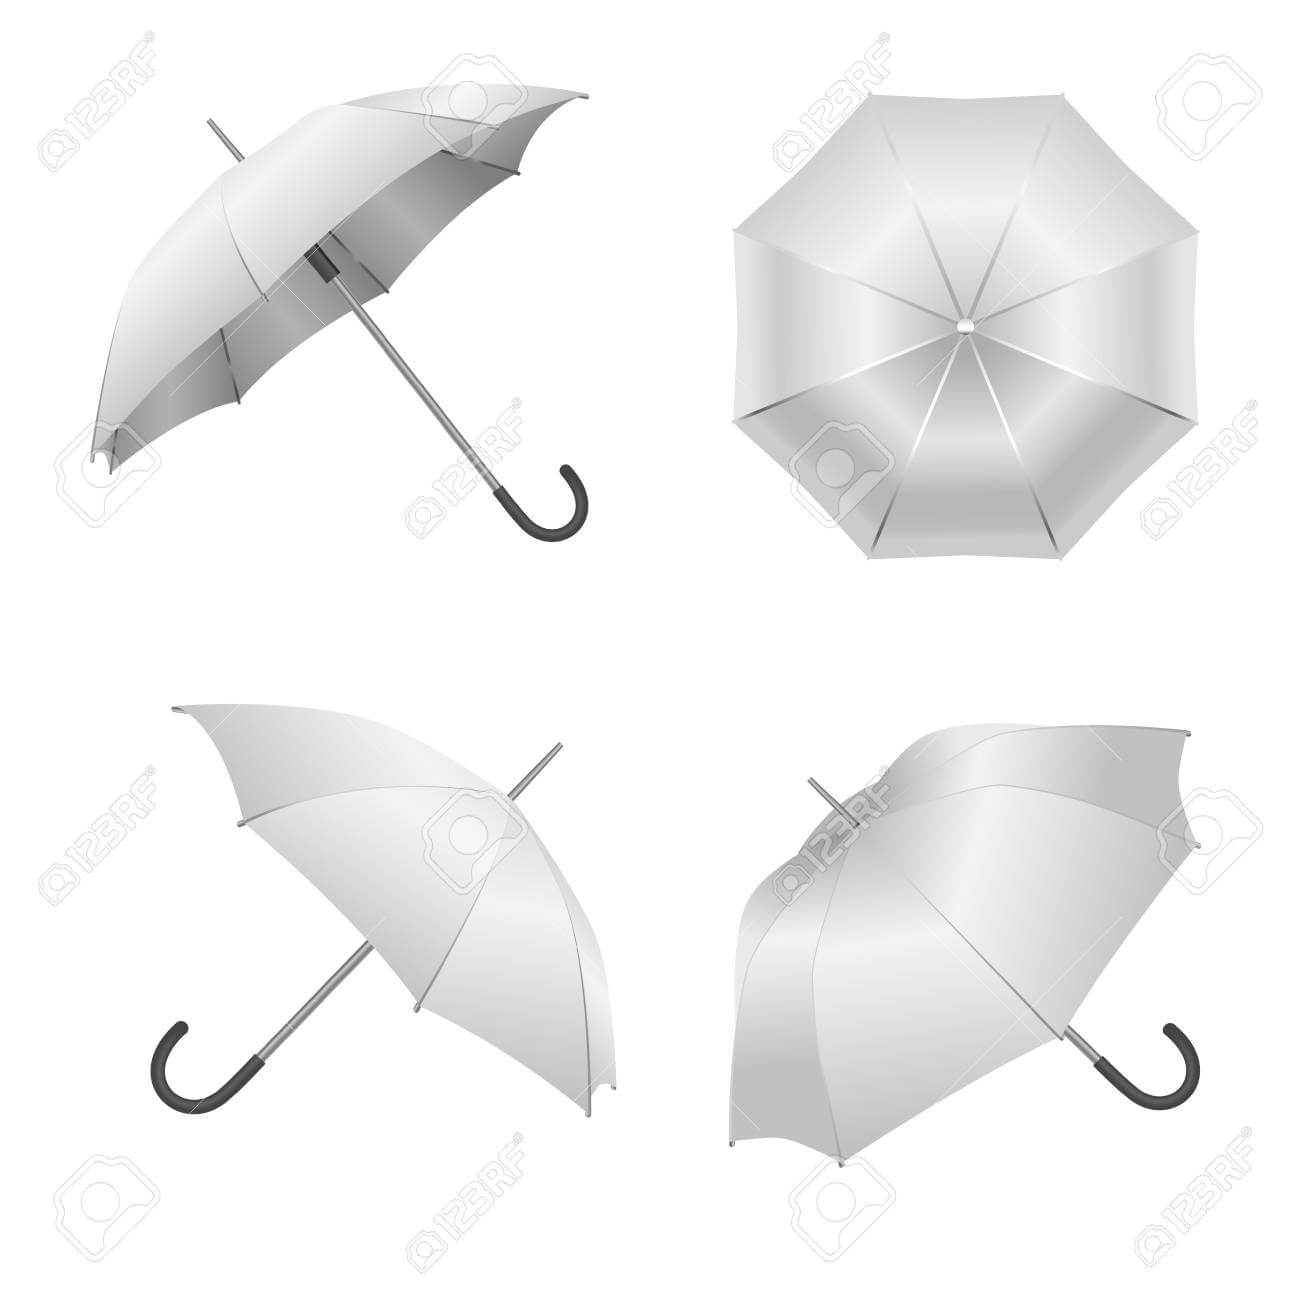 Realistic Detailed 3D White Blank Umbrella Template Mockup Set.. Pertaining To Blank Umbrella Template